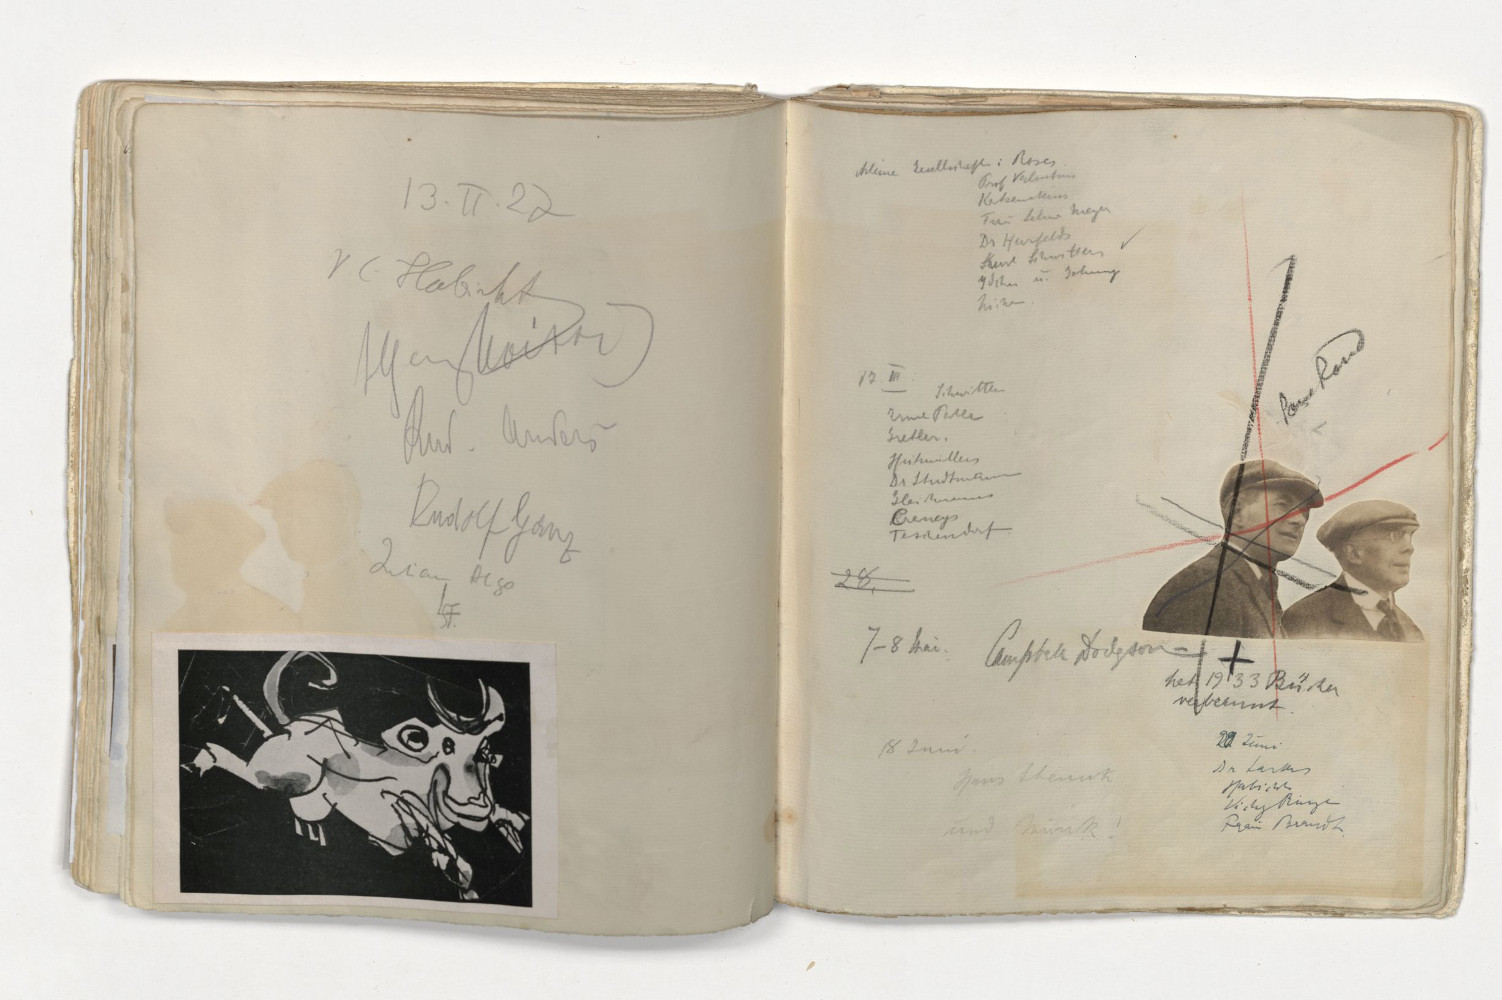 Hanover: "Burned books in 1933". Pages from the guest book belonging to the Ernst and Käte Steinitz family, kept 1920 - 1961. On the left, a drawing by Käte Steinitz from the book "Hahnepeter", on the right, the crossed-out photo of the art historian Victor Kurt Habicht, who organised the book burning of 10 May 1933 in Hanover. Sprengel Museum Hanover, property of: art collection of the City of Hanover